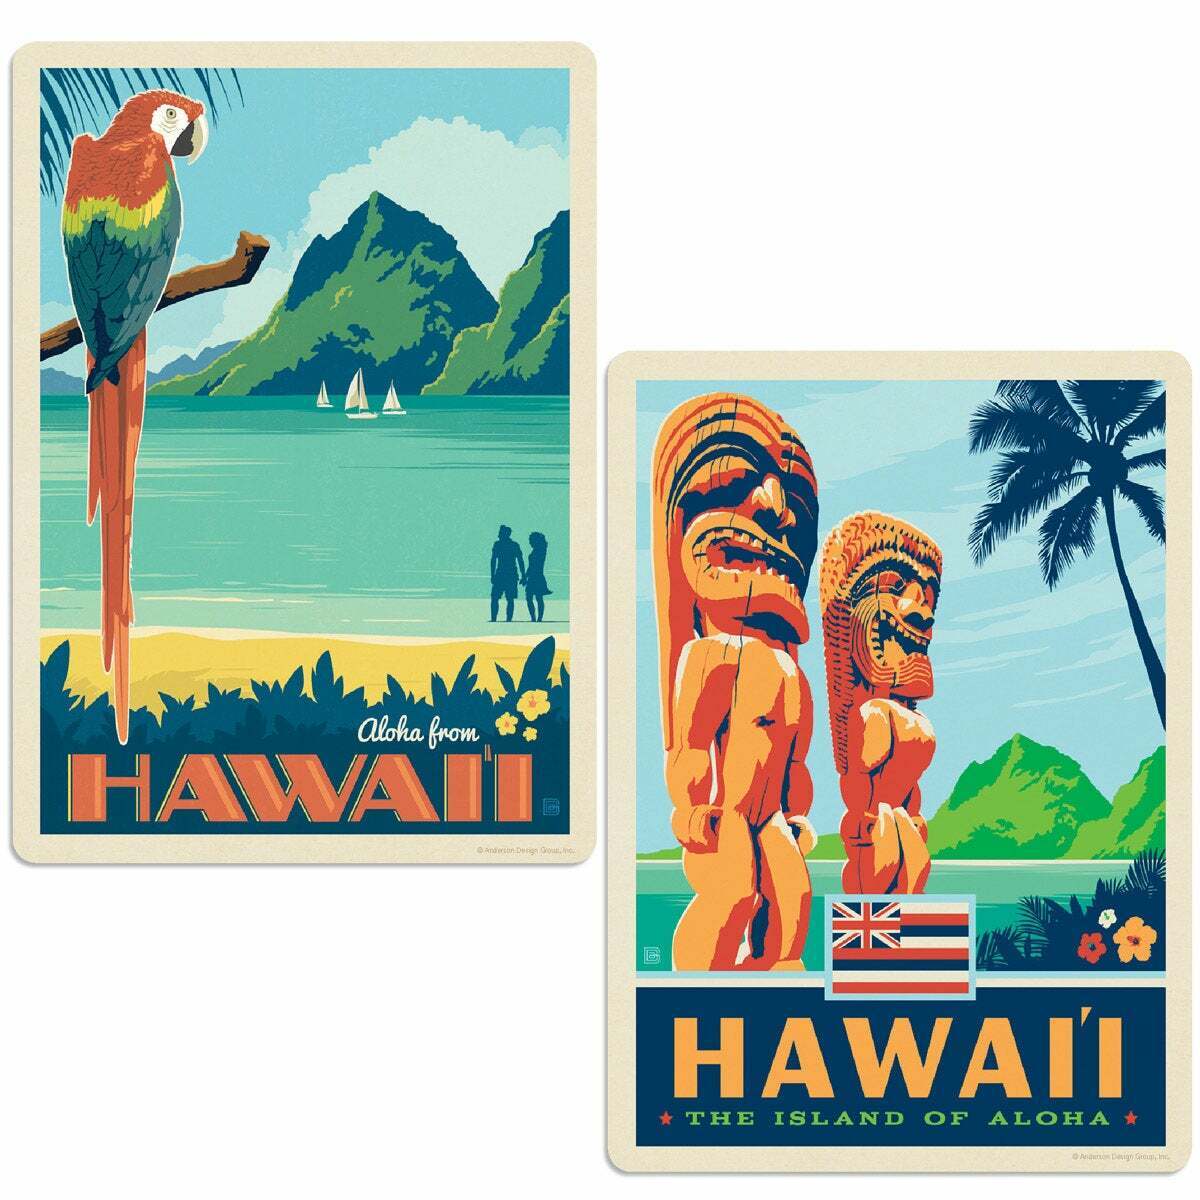 Hawaii Aloha Limited time for free shipping Tiki Gods Sticker Set 2 Cheap mail order shopping of Suitcase Vintage-Style D